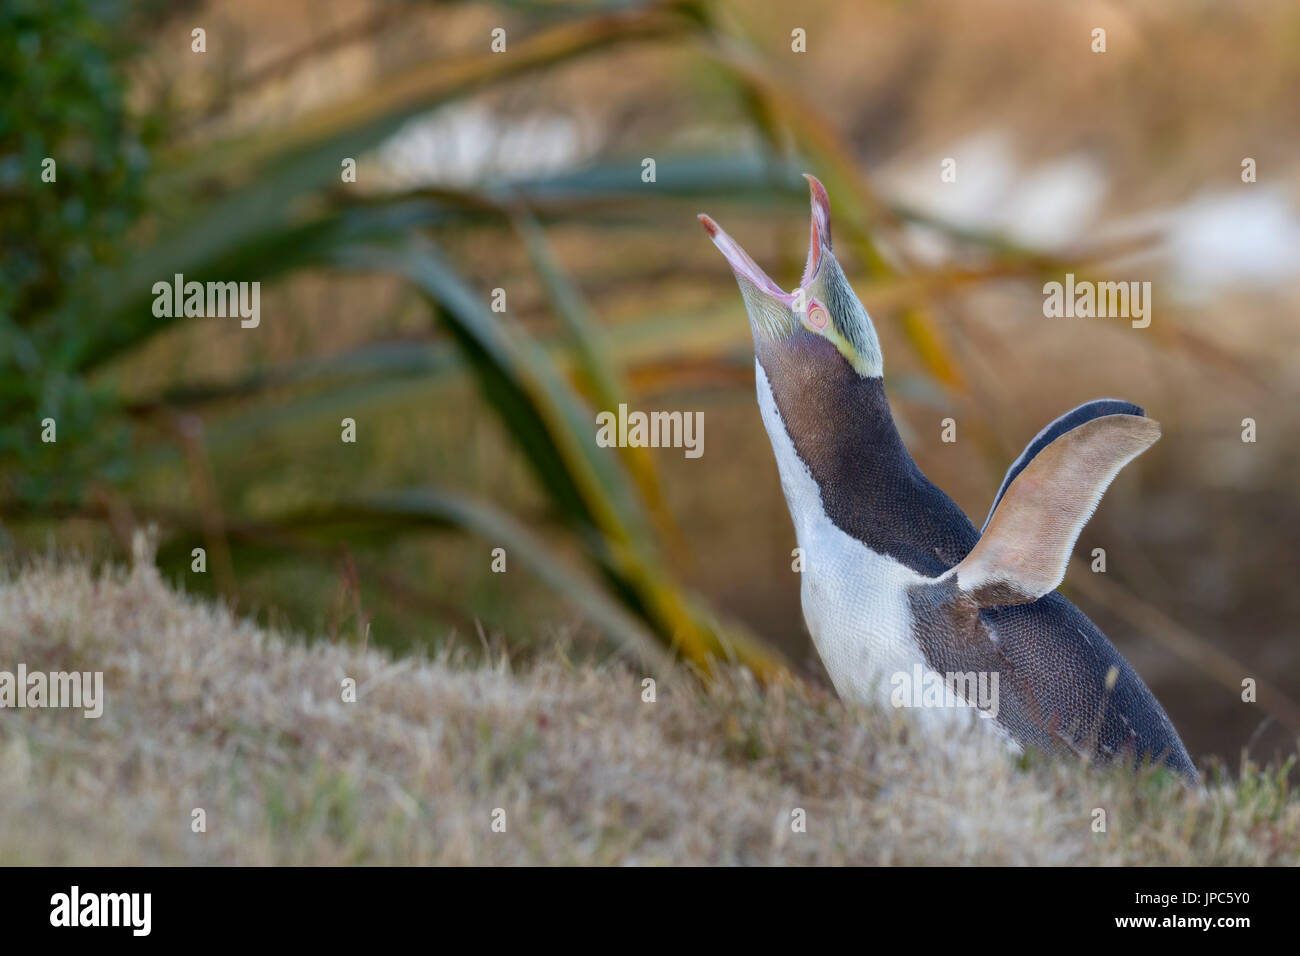 Endangered Yellow Eyed Penguins in South Island of New Zealand near Otago Peninsula Dunedin in Asia Pacific beside the sub antarctic ocean. Stock Photo